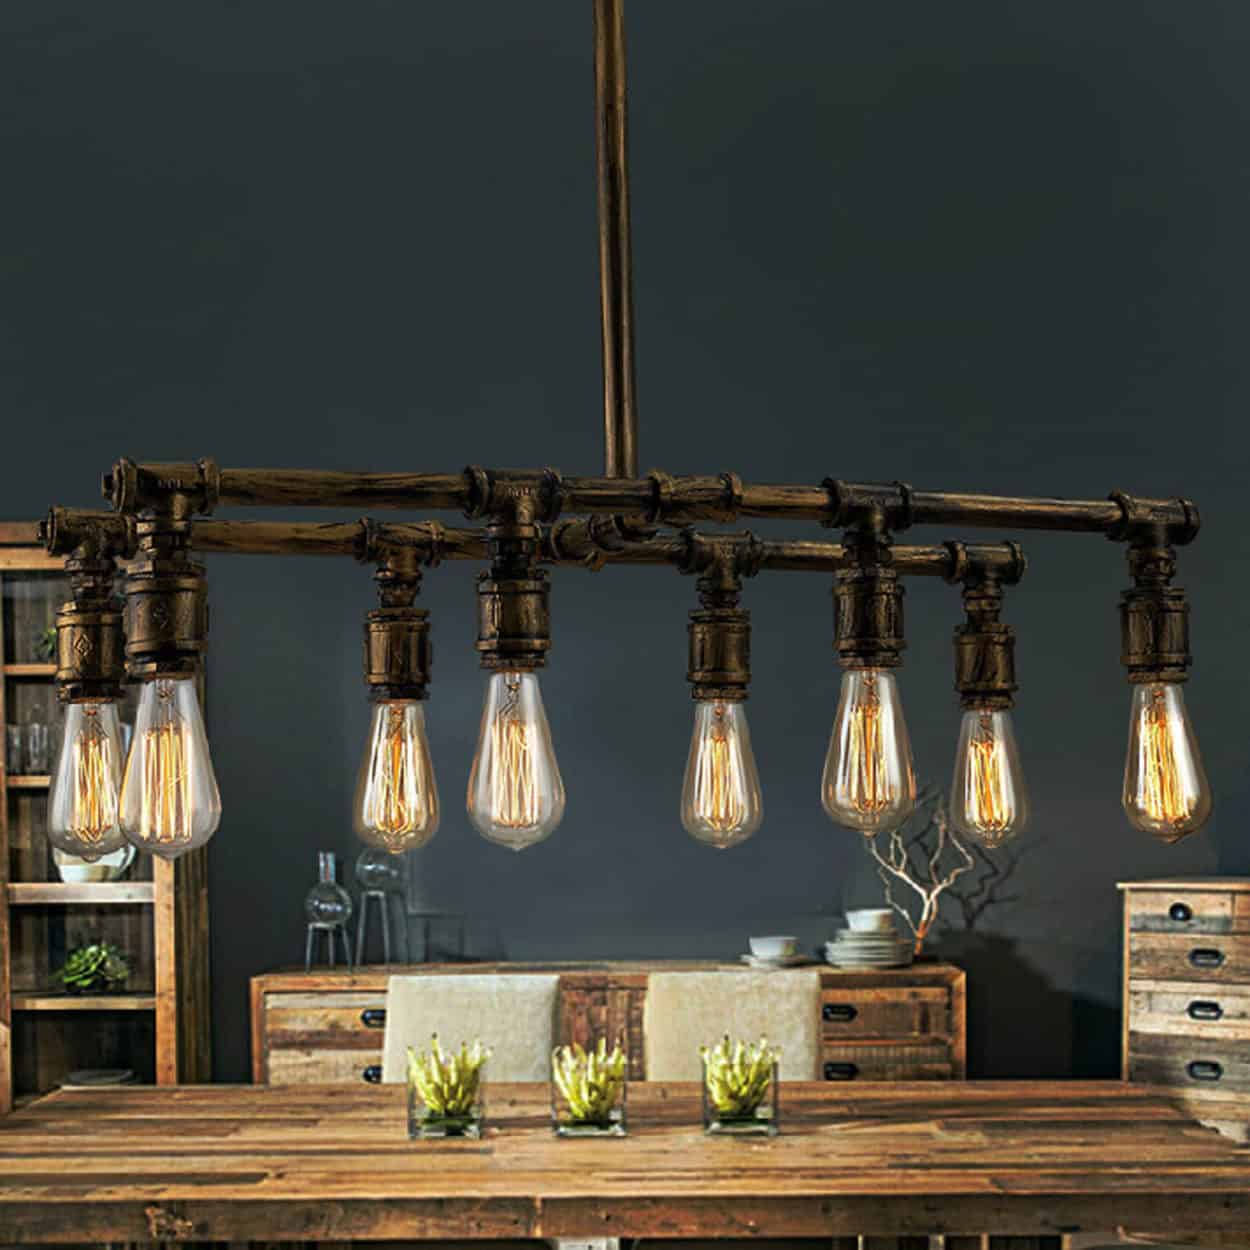 Pipeonie Industrial Pipes Hanging Lamp